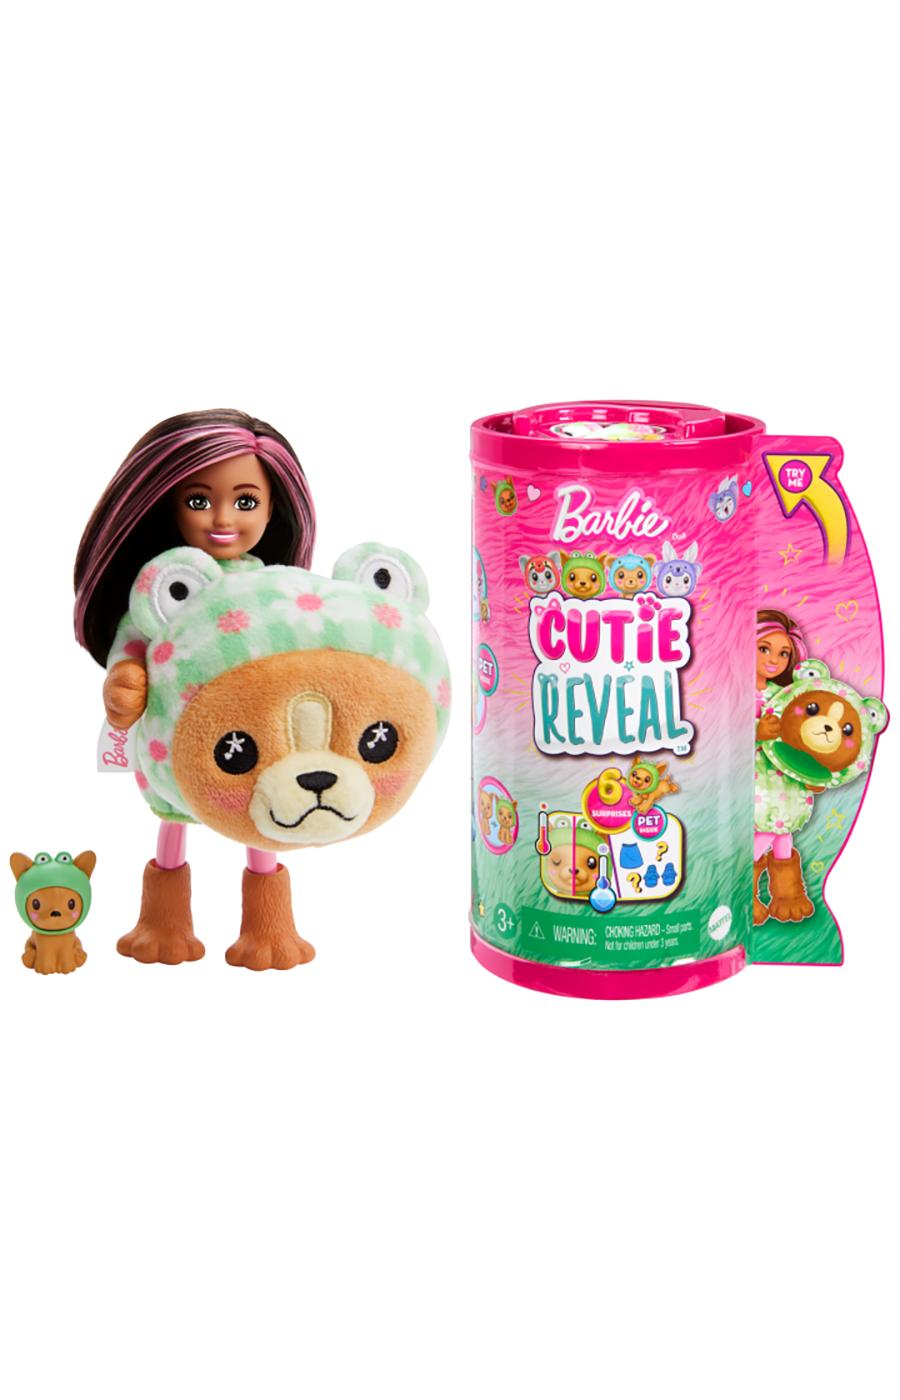 Barbie Cutie Reveal Costume Series Puppy as Frog Chelsea Doll; image 1 of 3